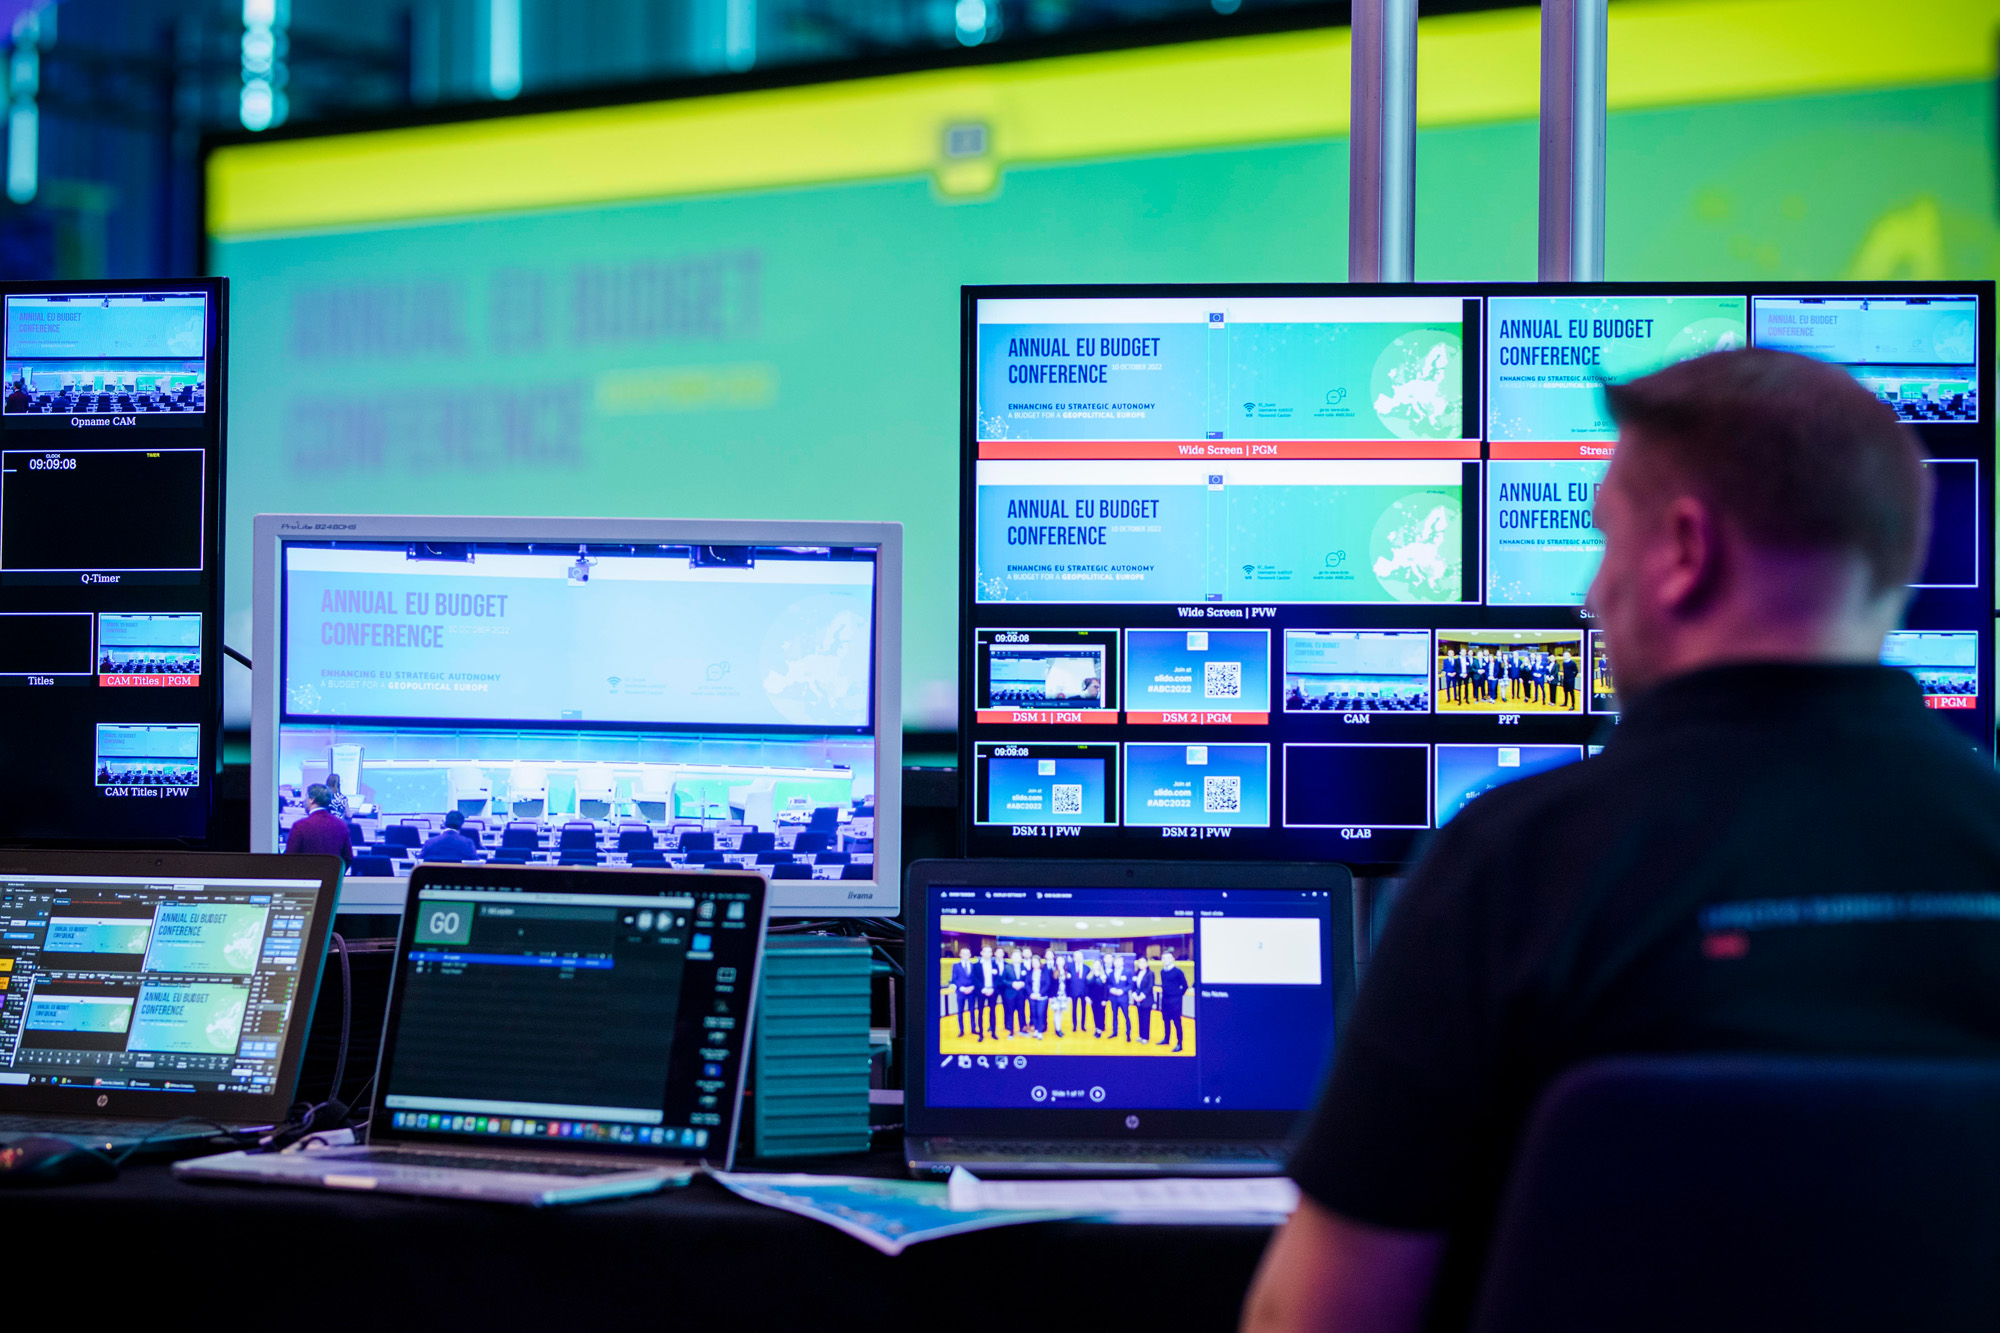 Annual EU Budget Conference 2022 - Monitoring screens and technical team